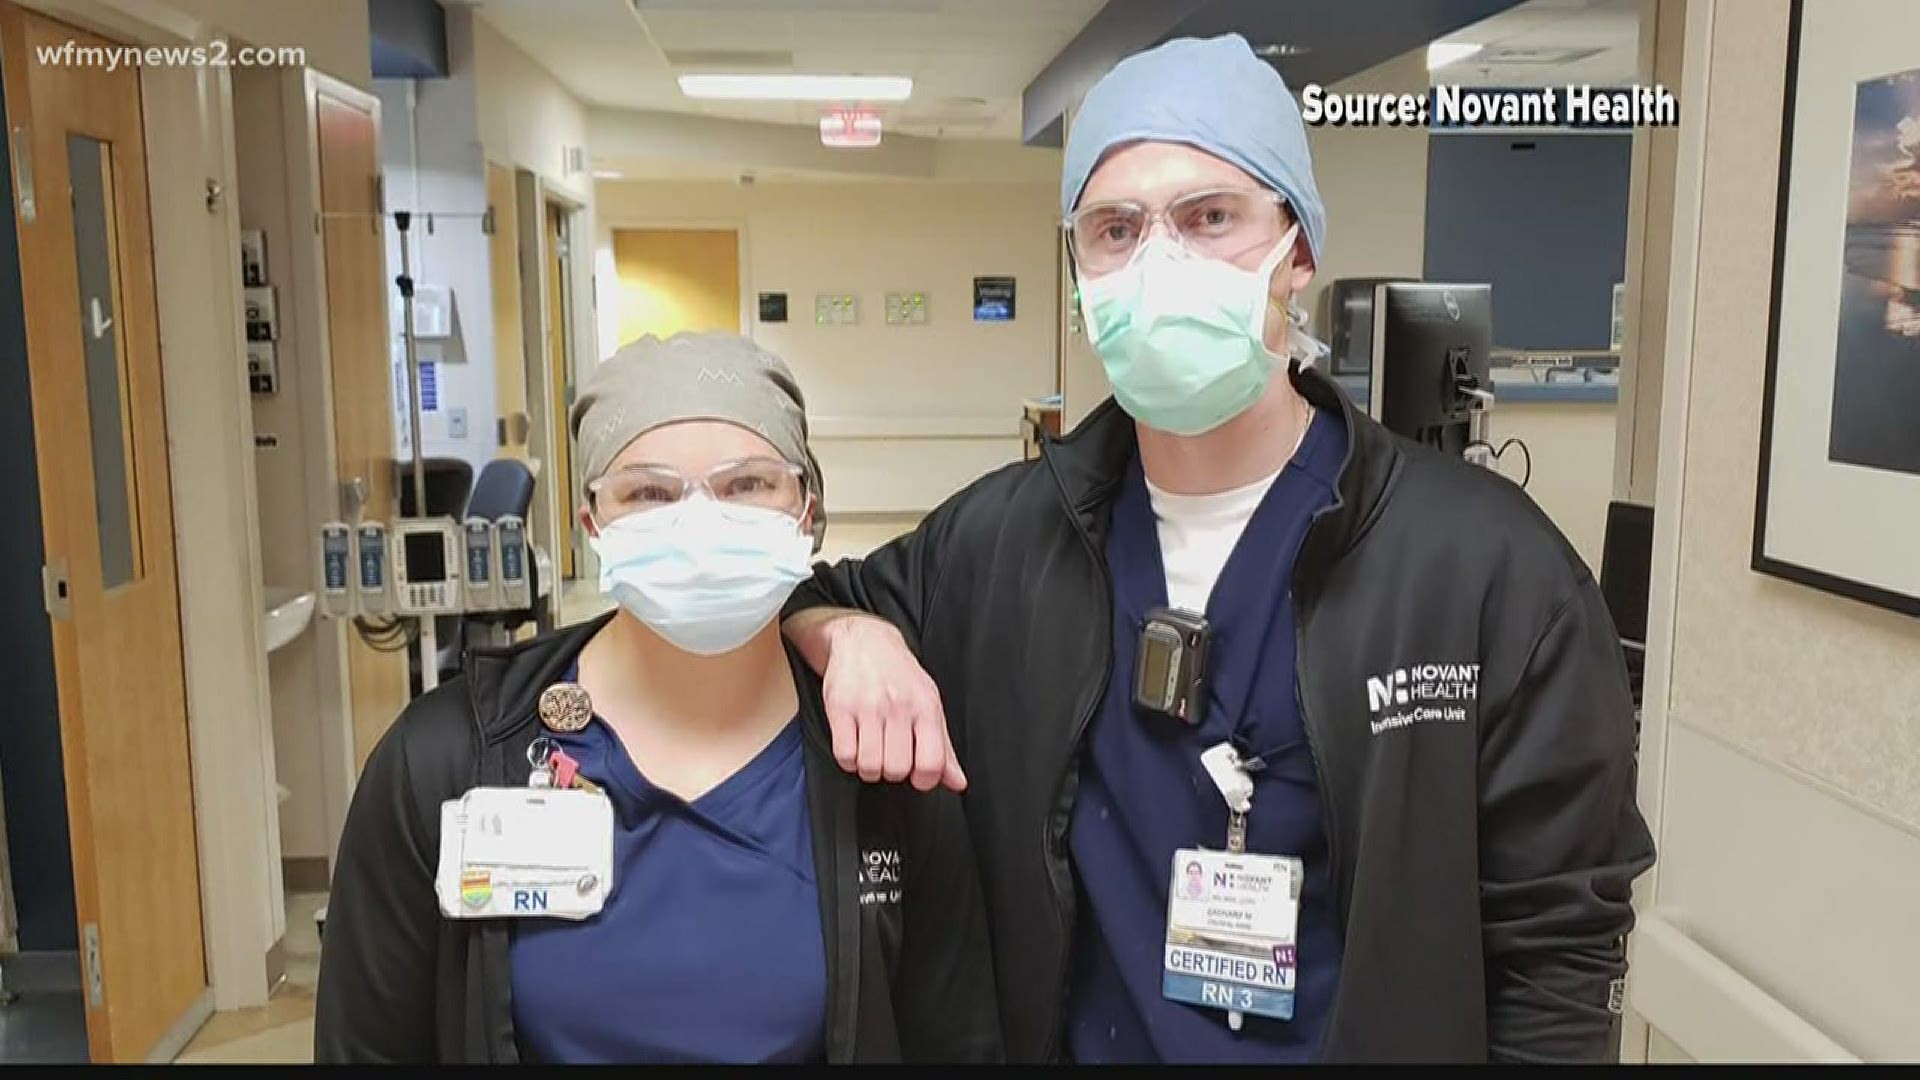 It's the work nurses Zack Matthews and Jessica Walls say they were called to do, but it's not getting any easier as the amount of patients they treat remains steady.